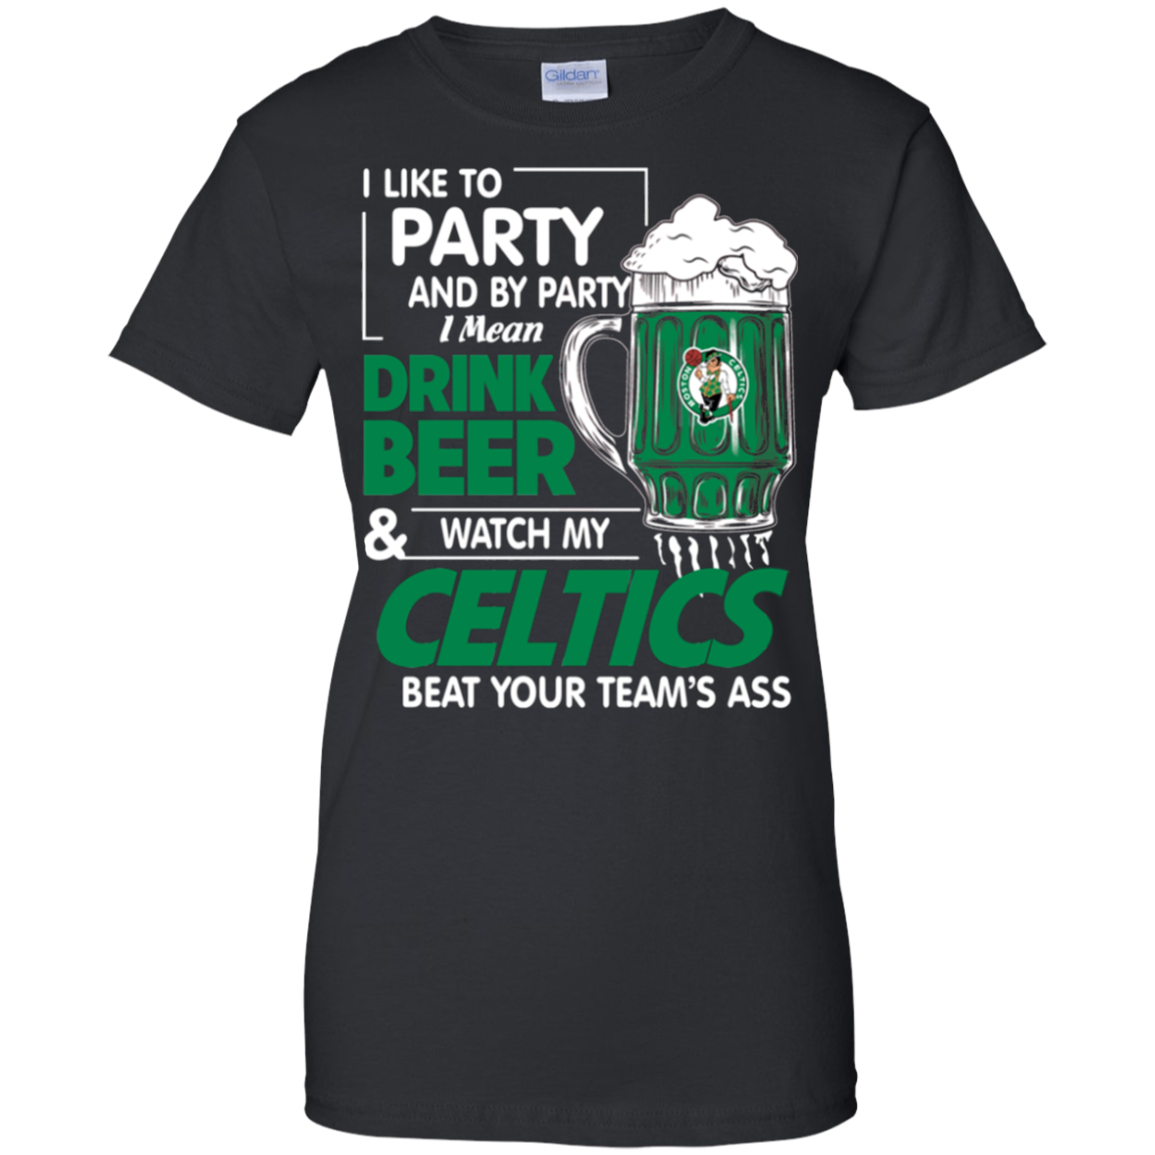 Like To Party And By Party Mean Drink Beer And Watch My Boston Celtics Beat Your Teams Ass